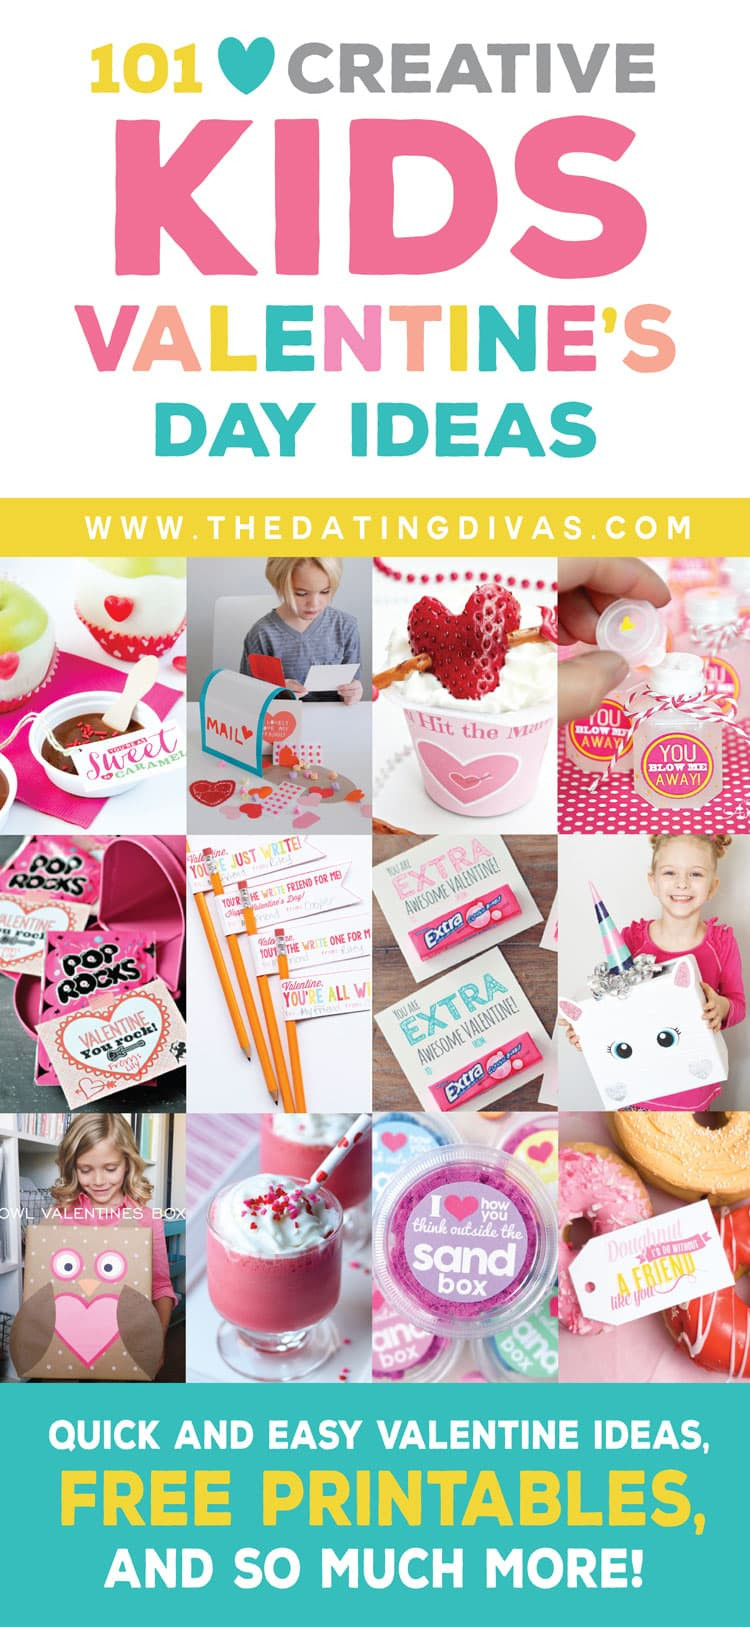 Valentines Day 2016 Date Ideas
 Kids Valentine s Day Ideas From The Dating Divas